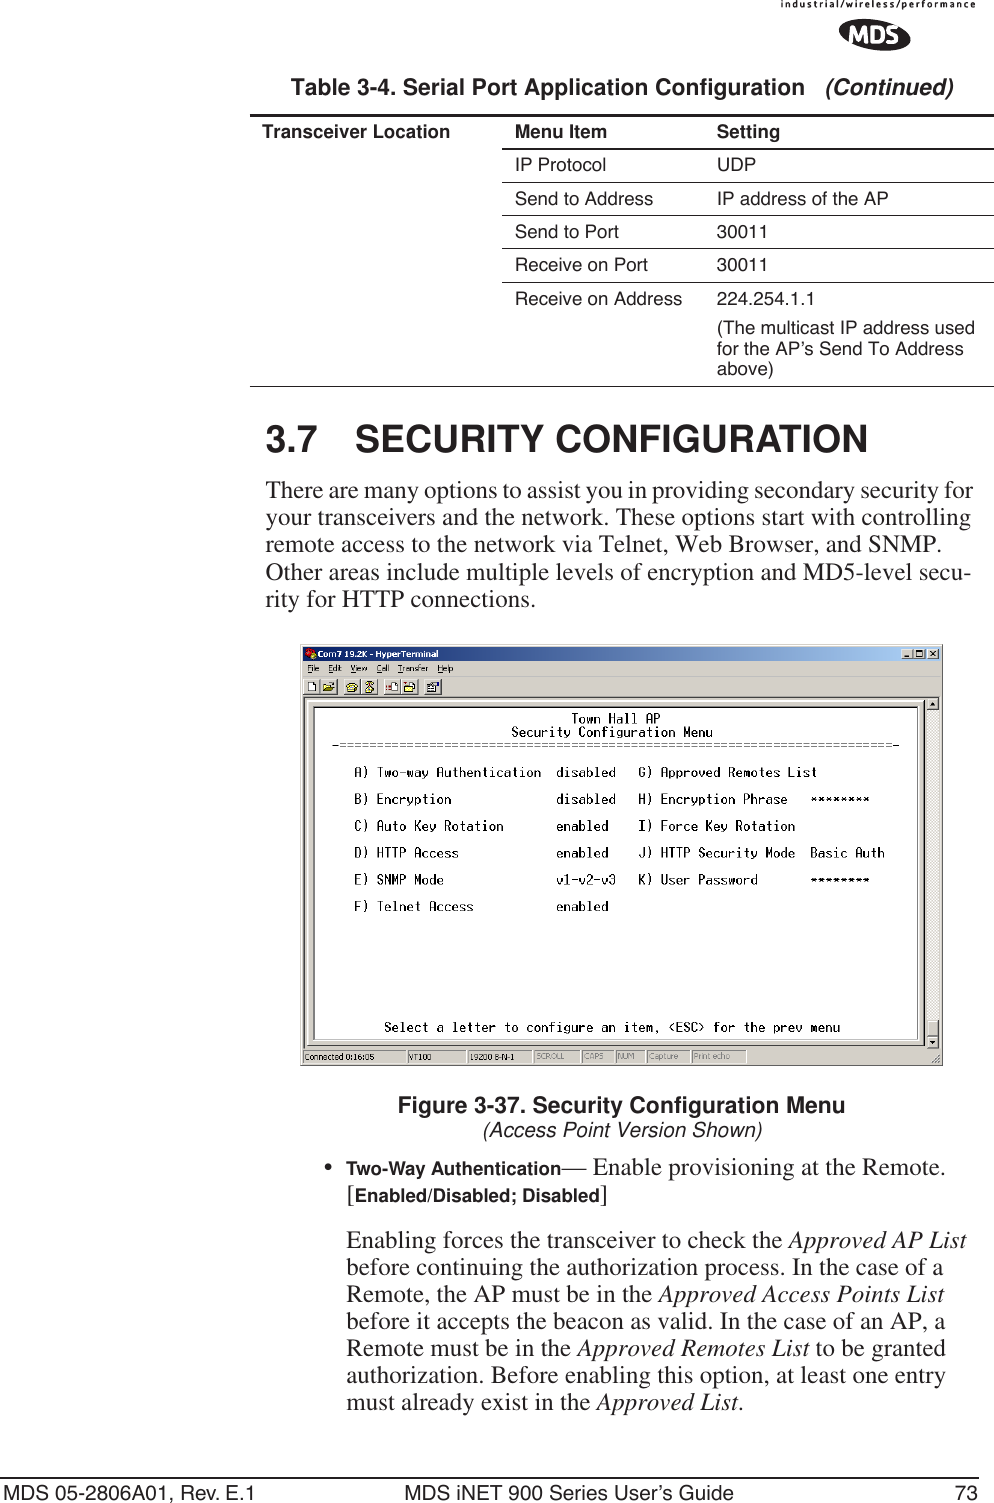 MDS 05-2806A01, Rev. E.1 MDS iNET 900 Series User’s Guide 733.7 SECURITY CONFIGURATIONThere are many options to assist you in providing secondary security for your transceivers and the network. These options start with controlling remote access to the network via Telnet, Web Browser, and SNMP. Other areas include multiple levels of encryption and MD5-level secu-rity for HTTP connections.Figure 3-37. Security Configuration Menu(Access Point Version Shown)•Two-Way Authentication— Enable provisioning at the Remote. [Enabled/Disabled; Disabled]Enabling forces the transceiver to check the Approved AP List before continuing the authorization process. In the case of a Remote, the AP must be in the Approved Access Points List before it accepts the beacon as valid. In the case of an AP, a Remote must be in the Approved Remotes List to be granted authorization. Before enabling this option, at least one entry must already exist in the Approved List.IP Protocol UDPSend to Address IP address of the APSend to Port 30011 Receive on Port 30011 Receive on Address 224.254.1.1(The multicast IP address used for the AP’s Send To Address above)Table 3-4. Serial Port Application Configuration   (Continued)Transceiver Location Menu Item Setting